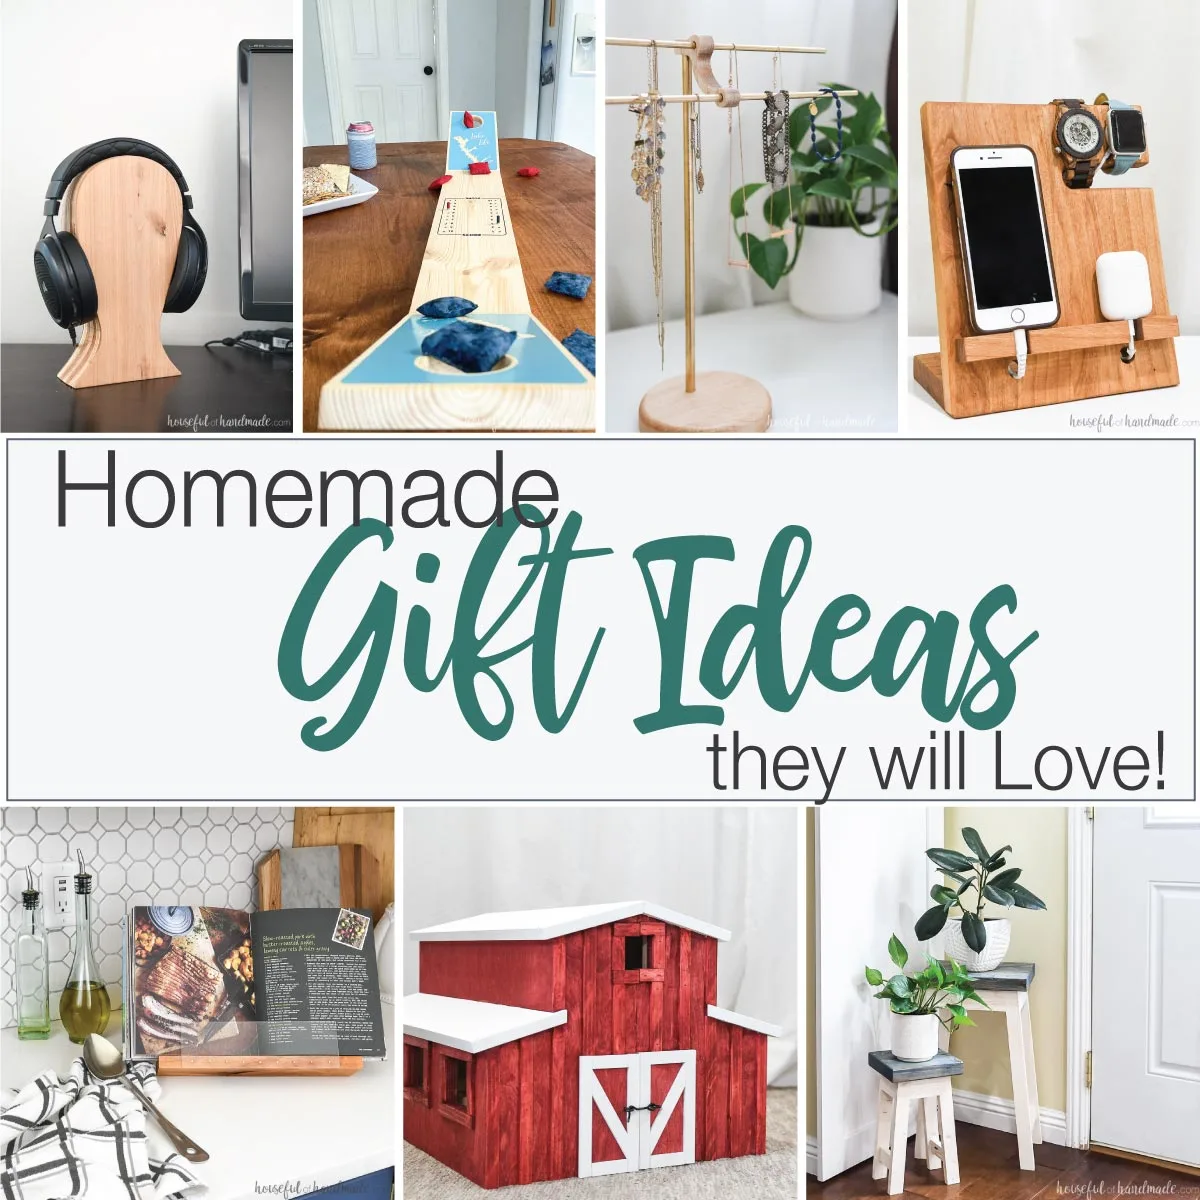 10 DIY Birthday Gift Ideas for Mom, DIY Projects Craft Ideas & How To's  for Home Decor with Videos